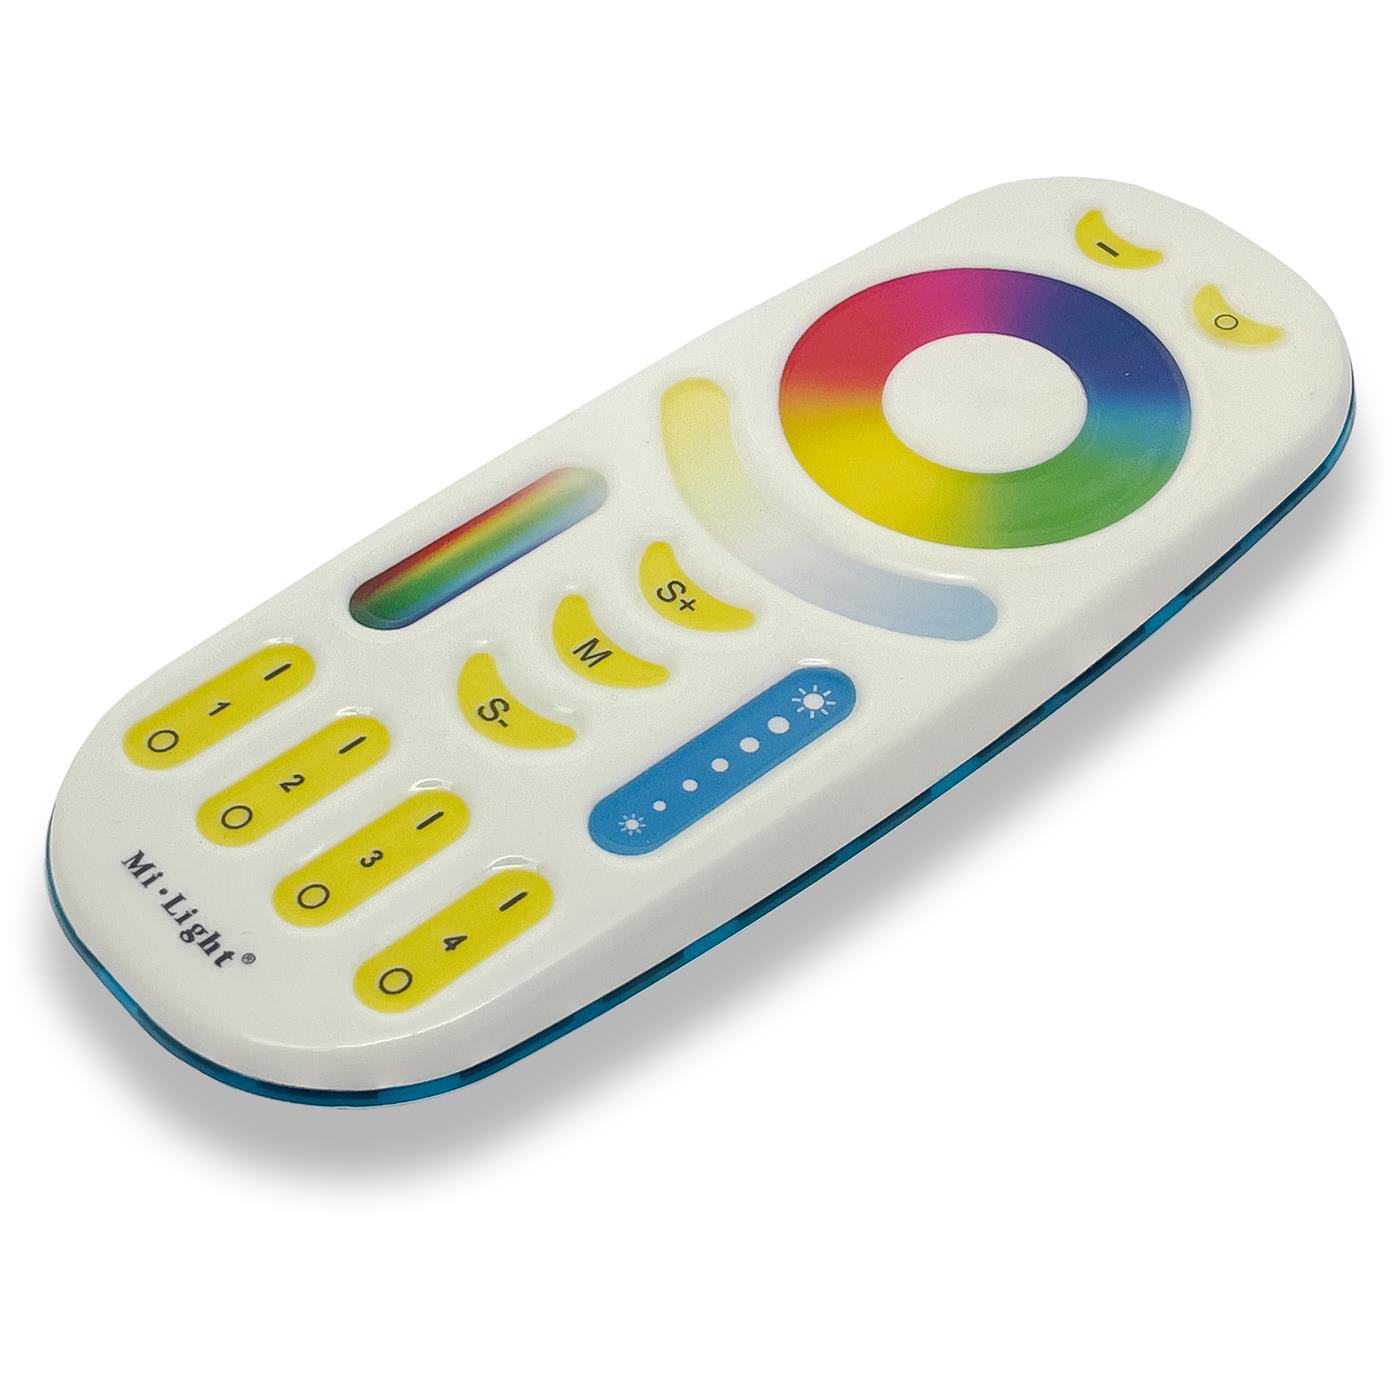 MiLight MiBoxer RGBW CCT LED 4-Zone Remote control Touch White for colour changing strips 6-Pin